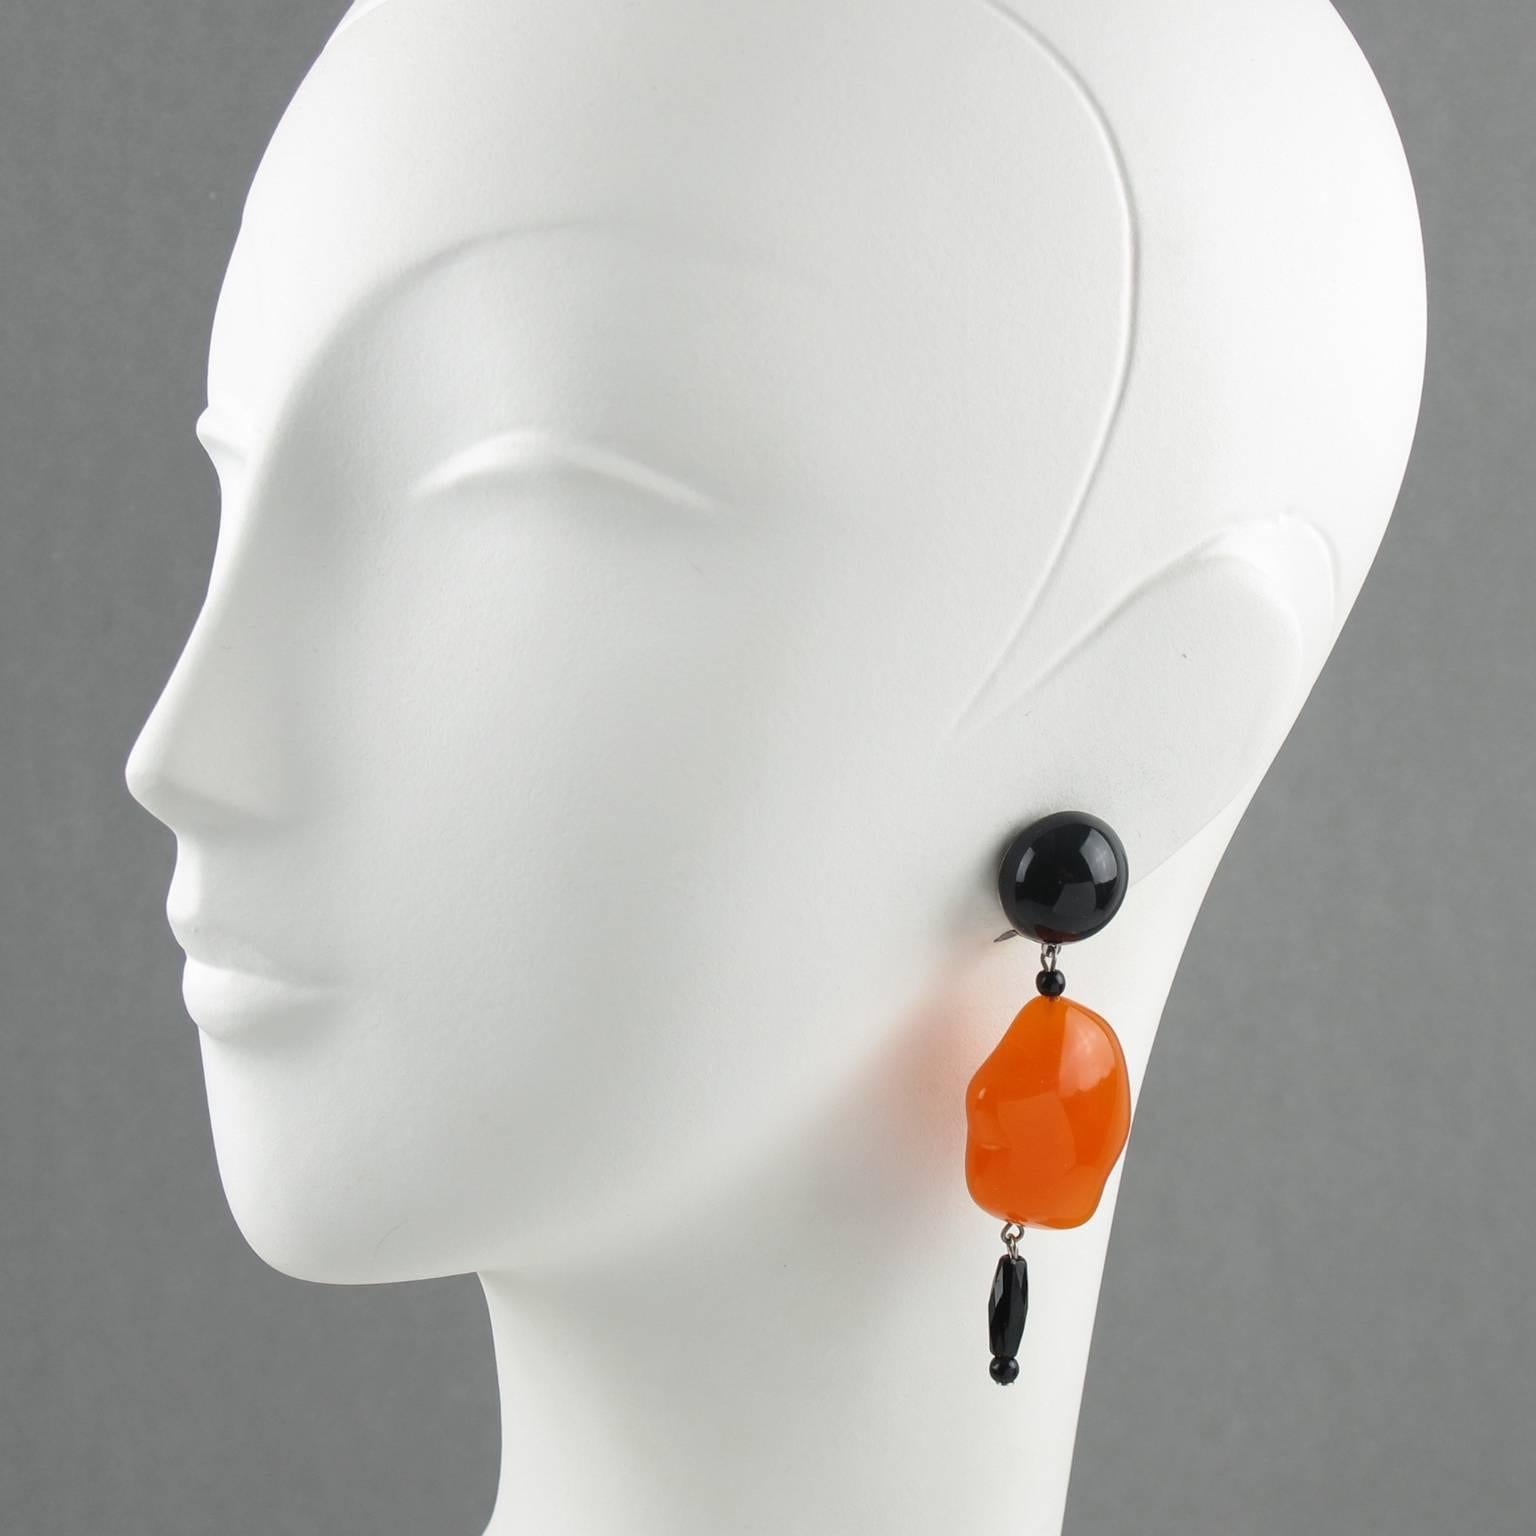 Elegant Angela Caputi, made in Italy resin clip on earrings. Dangling shape with black color contrasted with translucent carrot orange resin pebble bead. Her matching of colors is always extremely classy, perfect for casual as well as fancy